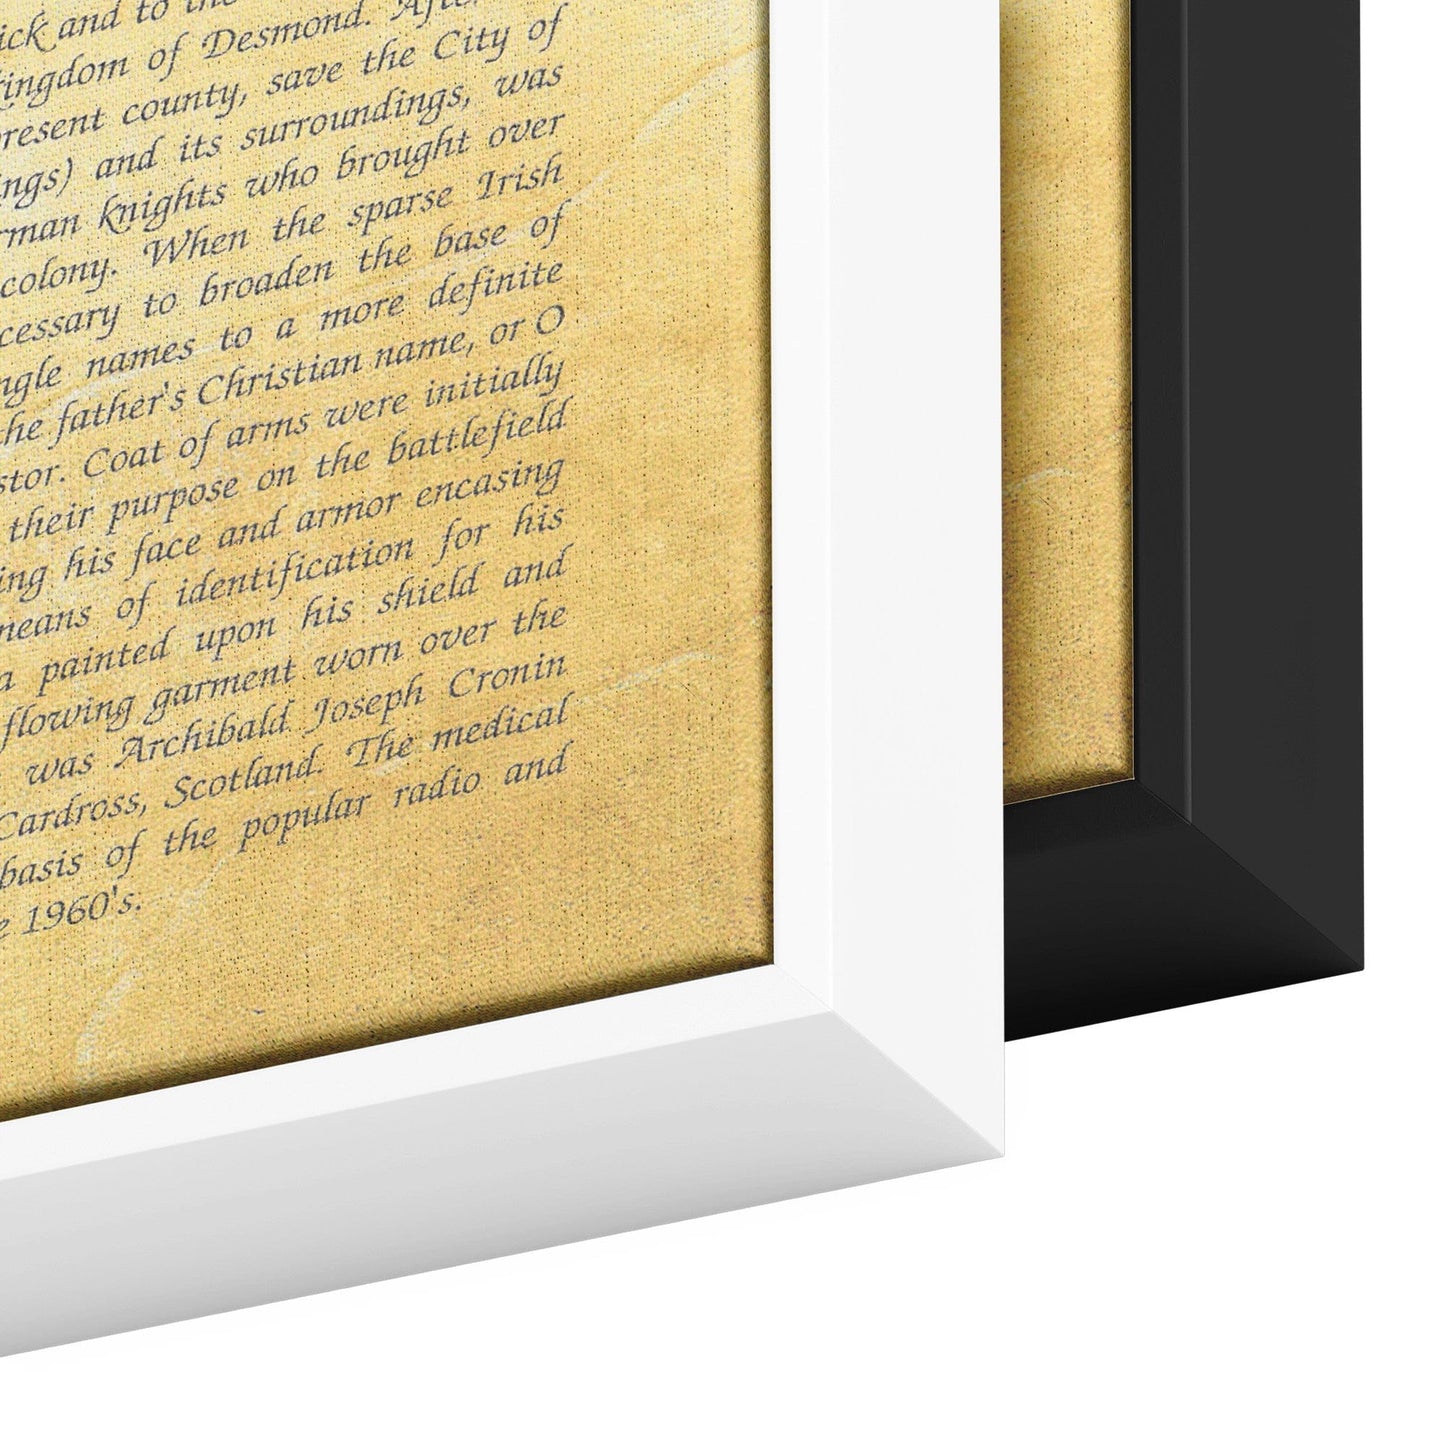 Family History and Coat of Arms Framed Canvas Print